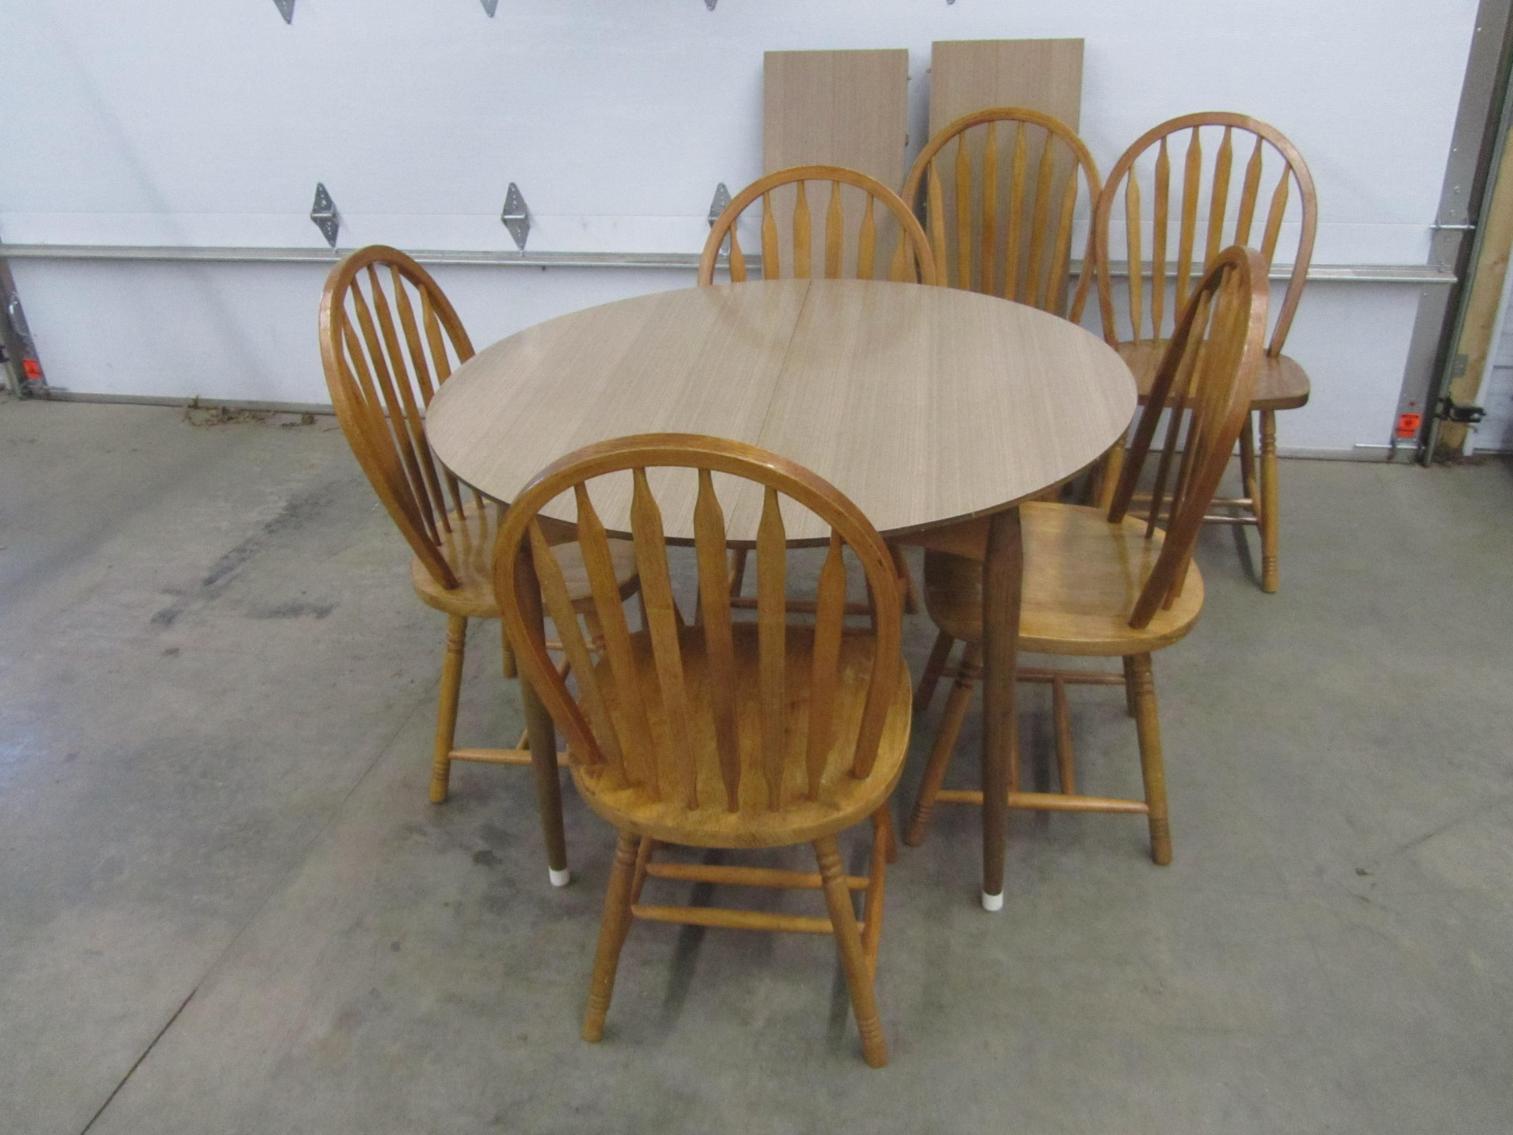 Ideal Corners January Consignment, Pequot Lakes, MN